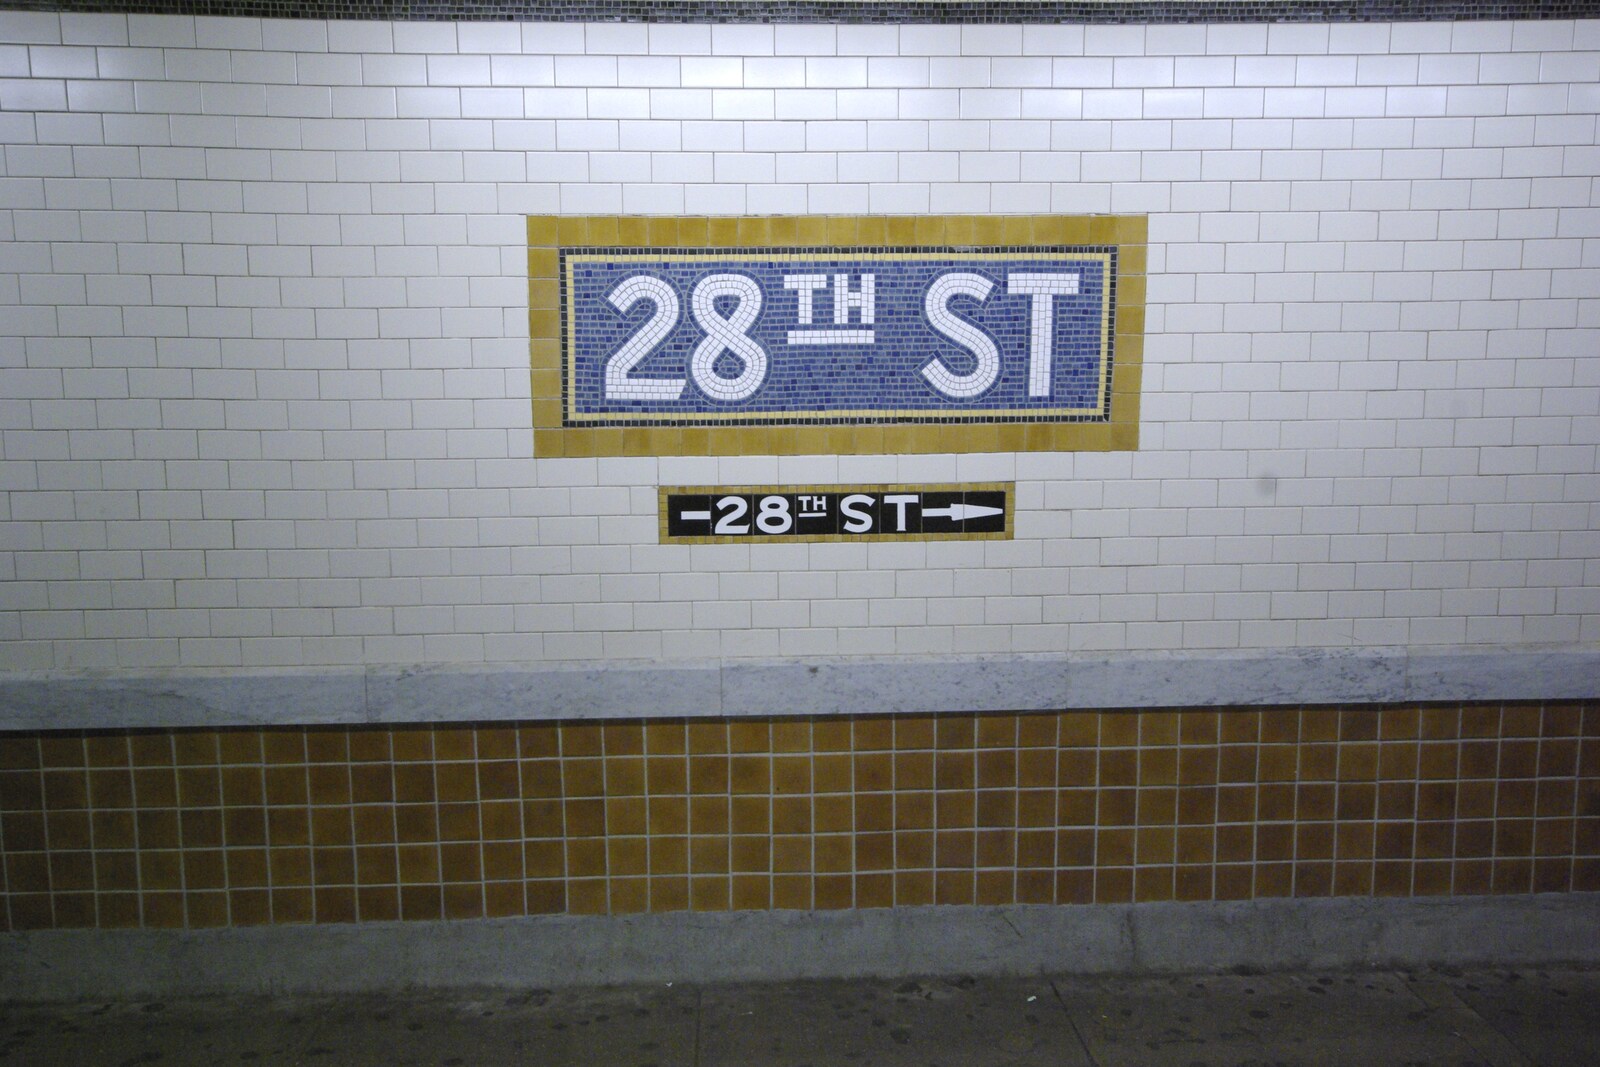 Persian Day Parade, Upper East Side and Midtown, New York, US - 25th March 2007: The 28th Street subway sign